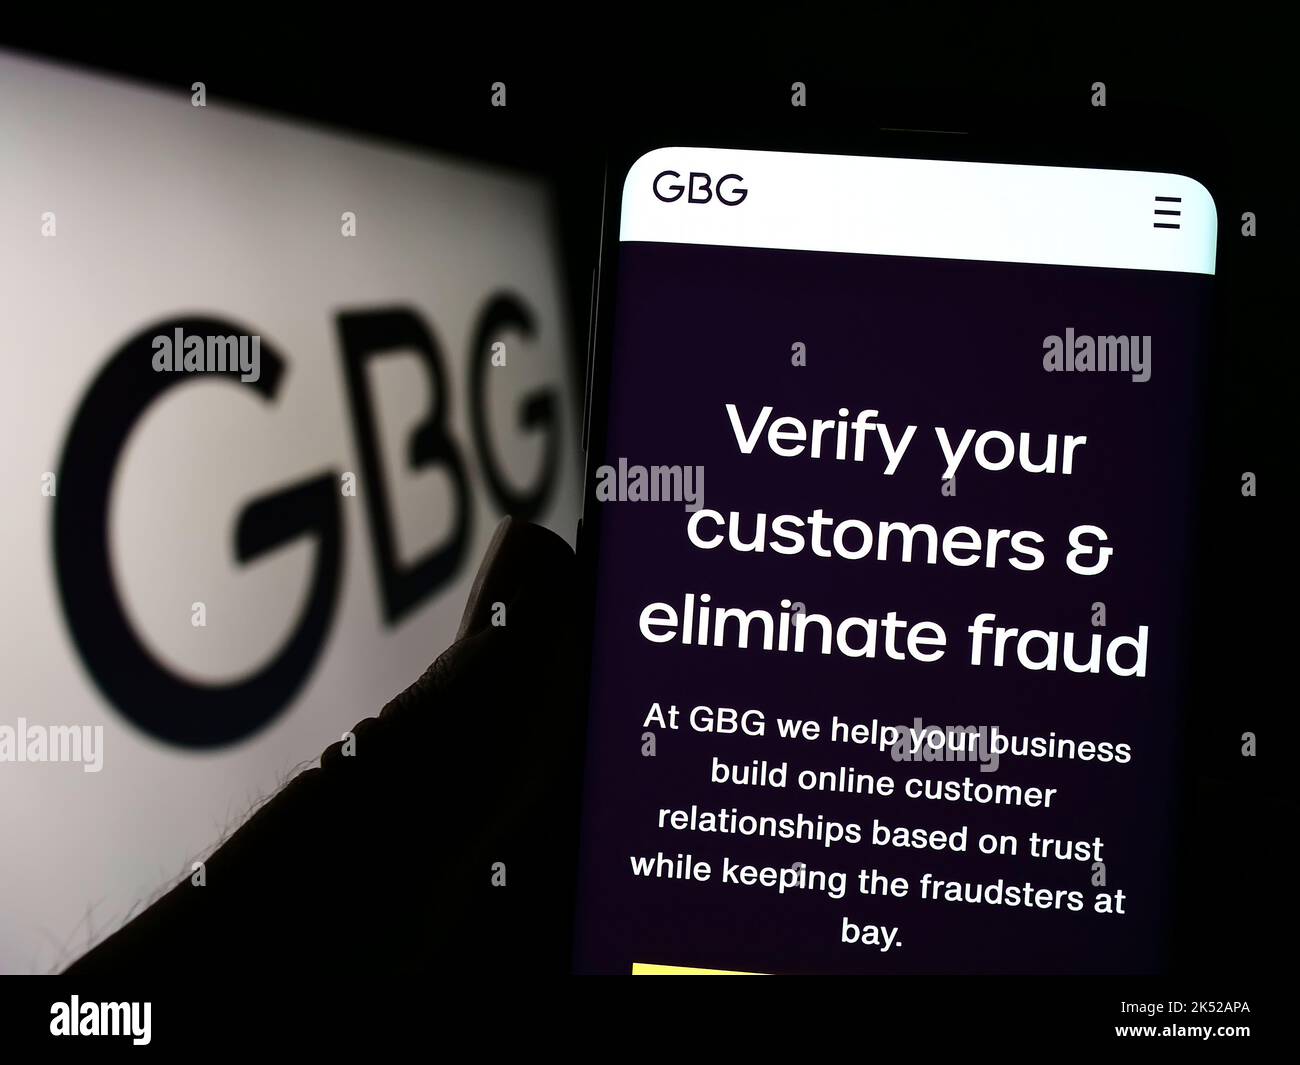 Person holding cellphone with website of identity verification company GB Group plc (GBG) on screen with logo. Focus on center of phone display. Stock Photo